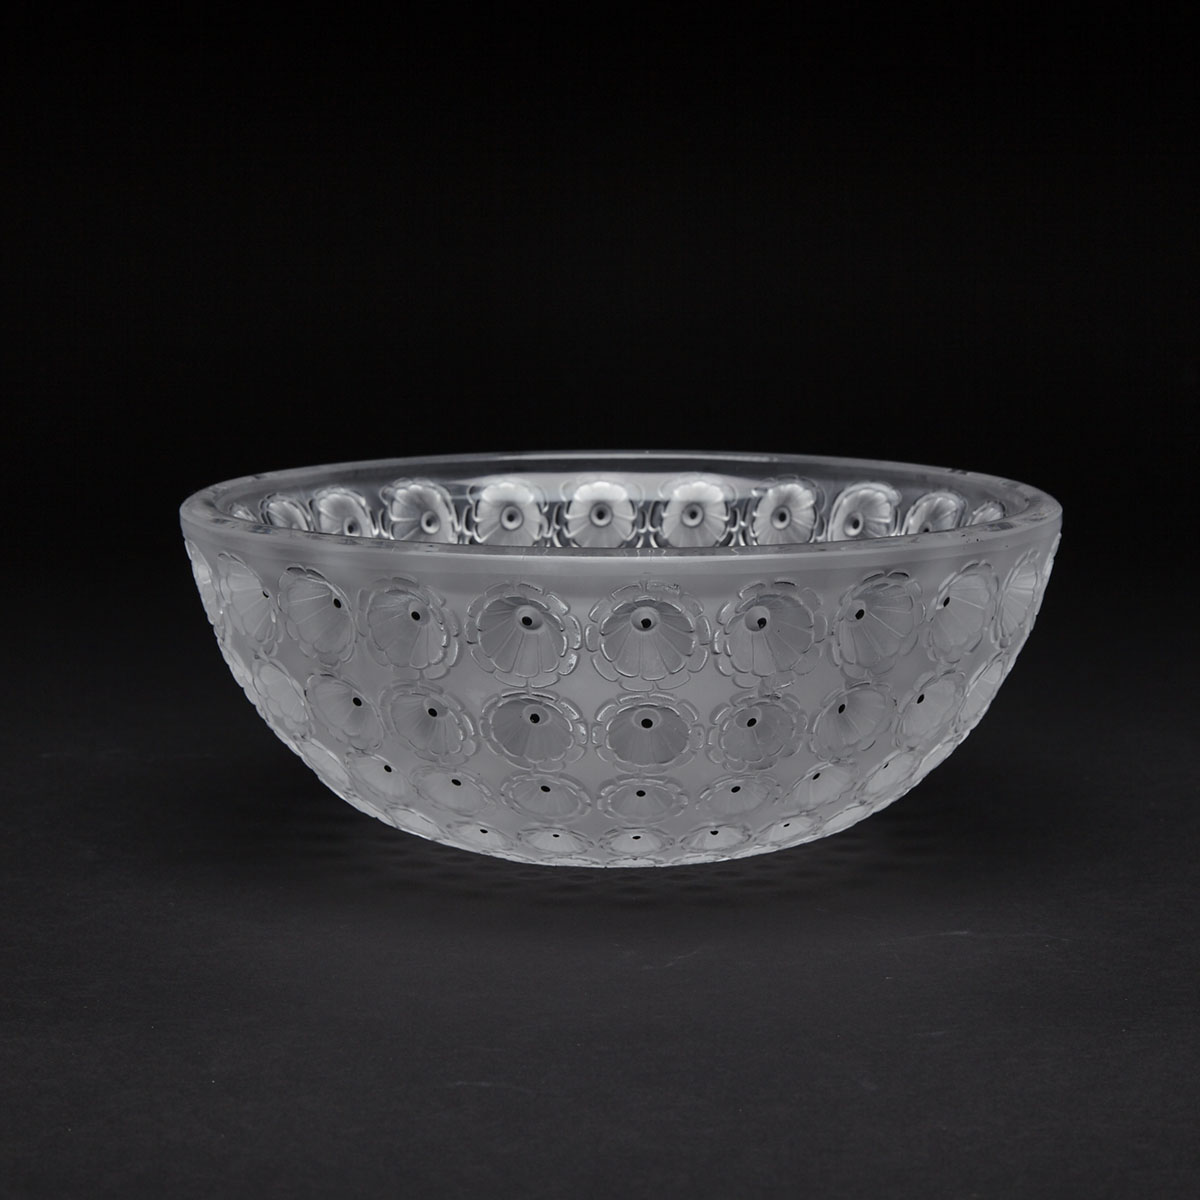 ‘Nemours’, Lalique Frosted and Enameled Glass Bowl, 20th century